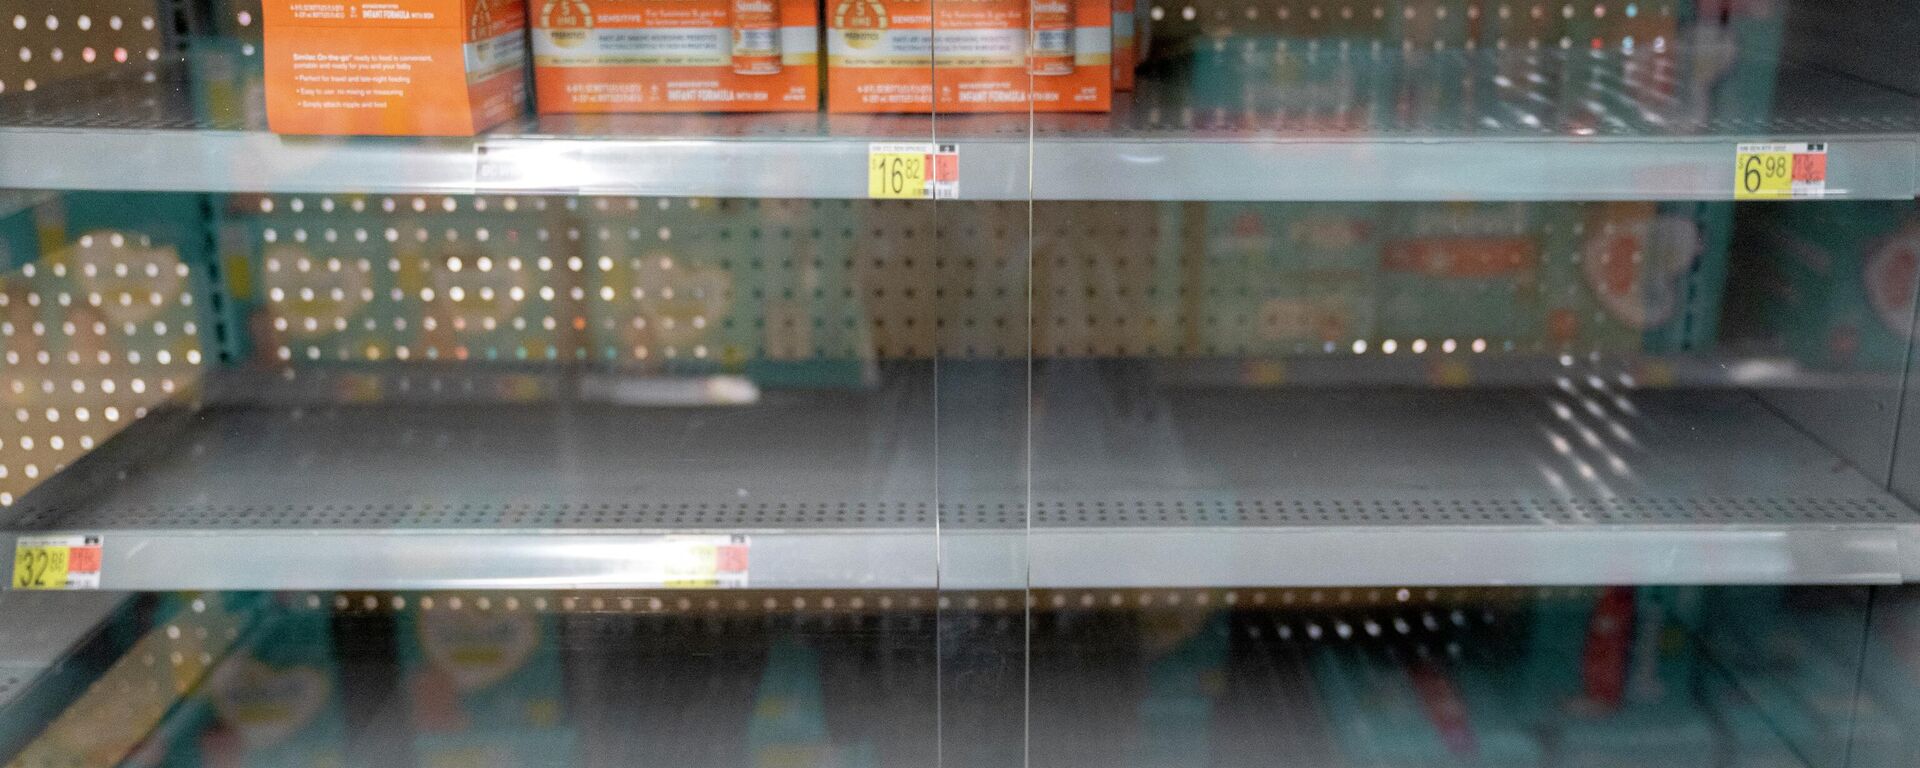 Grocery store shelves where baby formula is typically stocked are locked and nearly empty in Washington, DC, on May 11, 2022 - Sputnik International, 1920, 14.05.2022